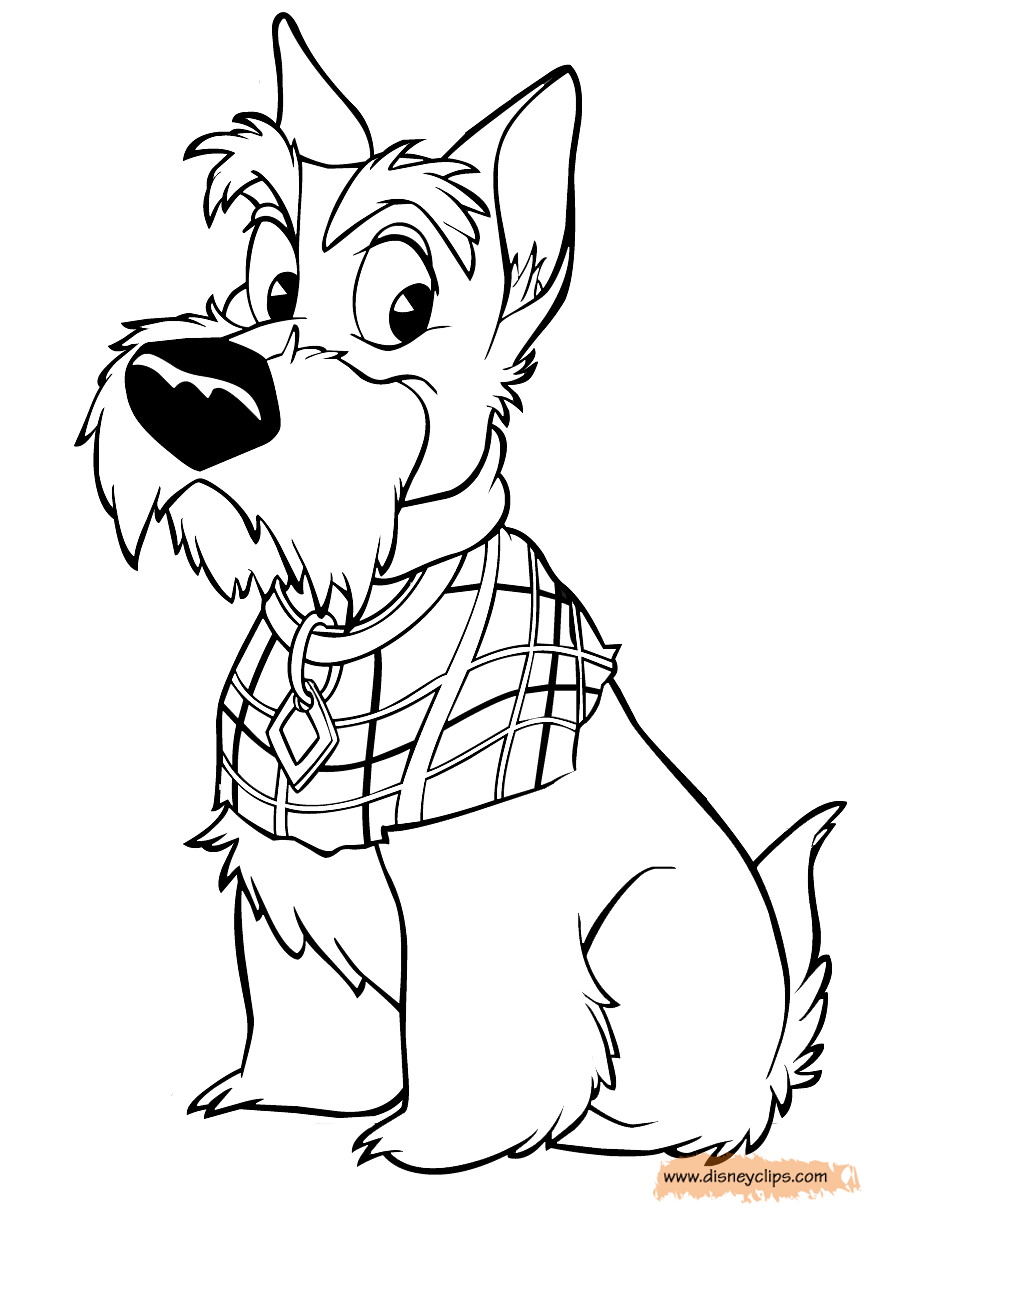 lady and the tramp coloring pages lady and the tramp coloring pages disneyclipscom tramp lady and pages coloring the 